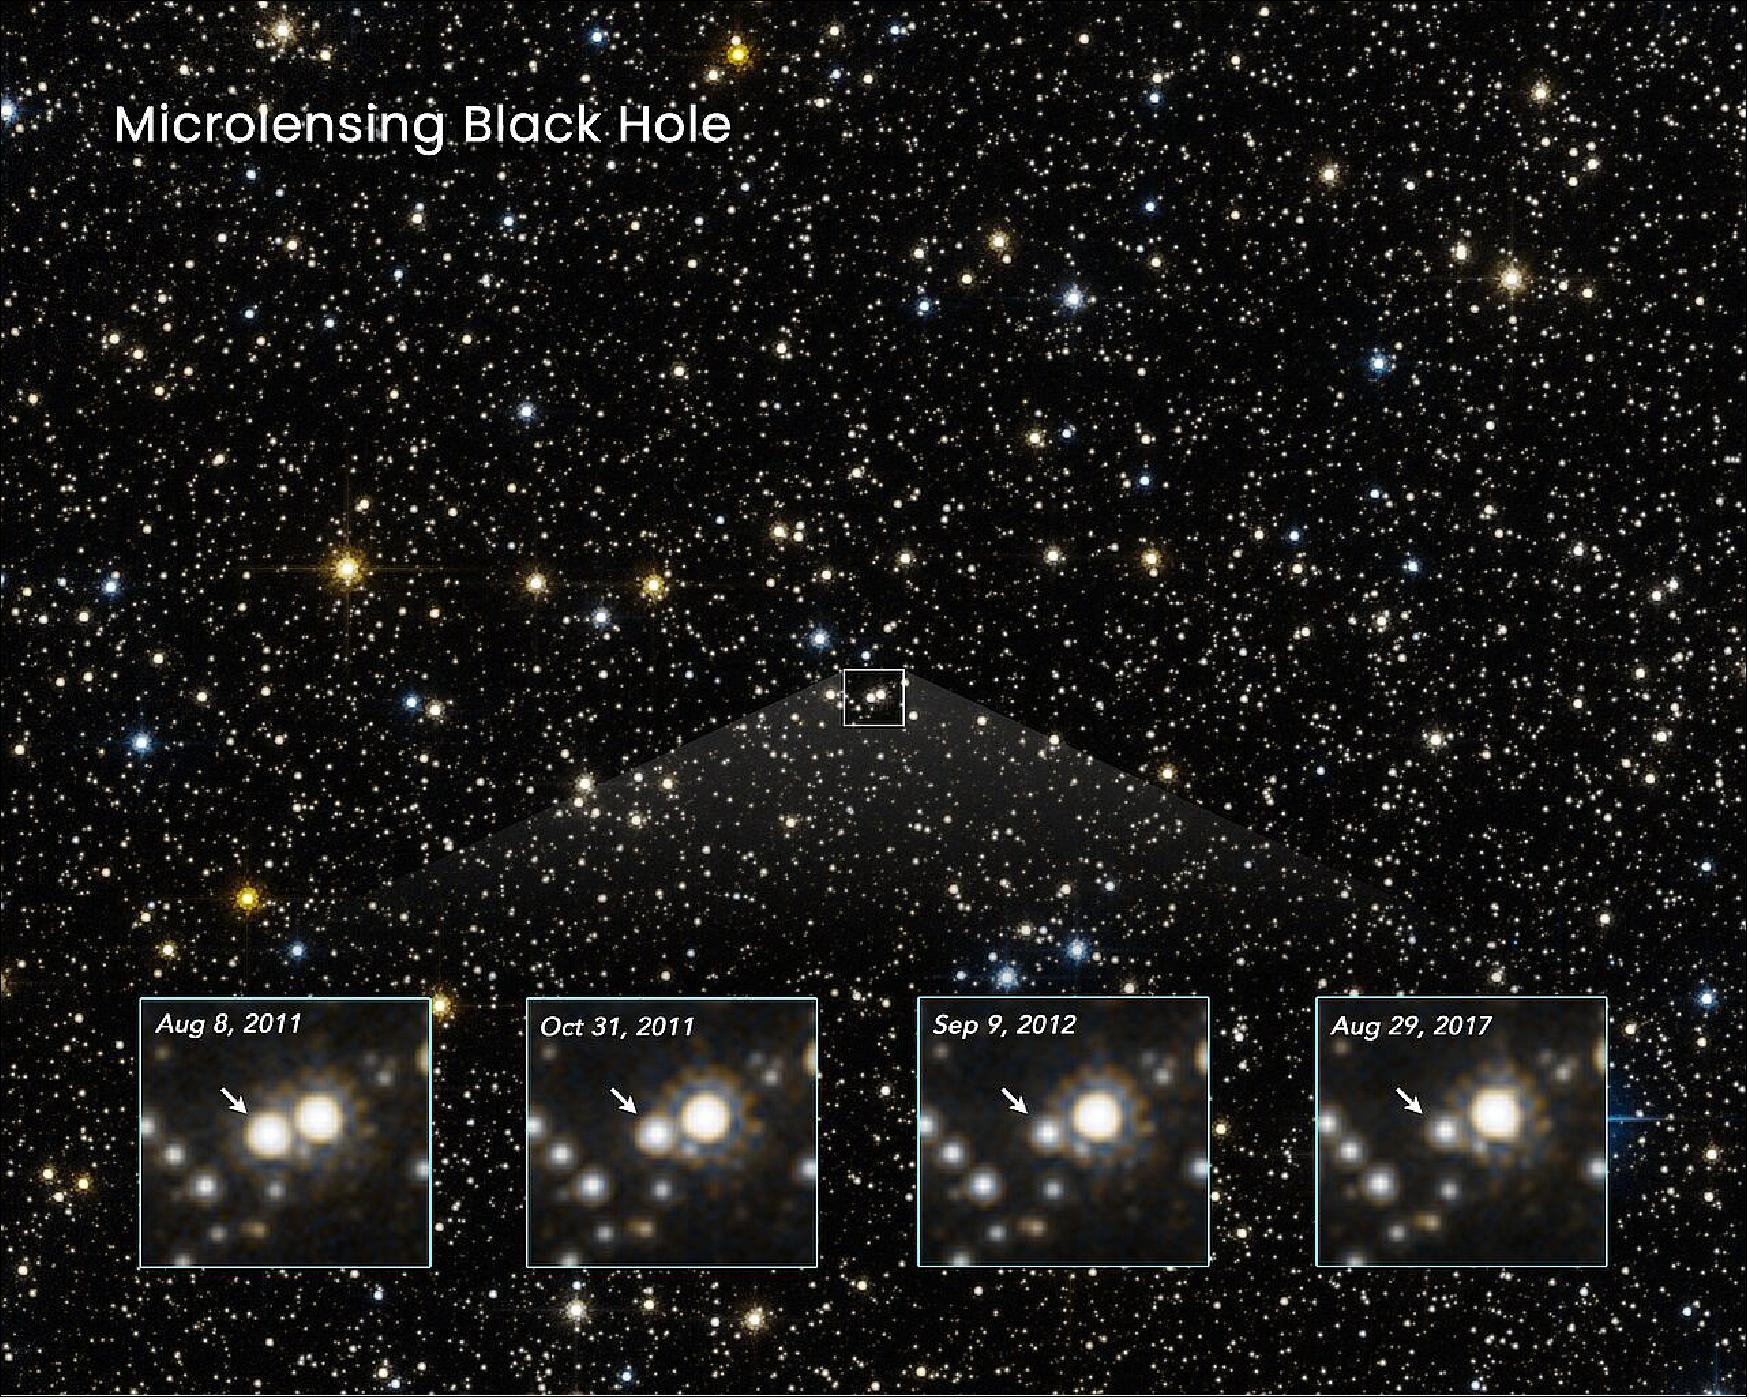 Figure 24: The star-filled sky in this NASA/ESA Hubble Space Telescope photo lies in the direction of the Galactic centre. The light from stars is monitored to see if any change in their apparent brightness is caused by a foreground object drifting in front of them. The warping of space by the interloper would momentarily brighten the appearance of a background star, an effect called gravitational lensing. One such event is shown in the four close-up frames at the bottom. The arrow points to a star that momentarily brightened, as first captured by Hubble in August 2011. This was caused by a foreground black hole drifting in front of the star, along our line of sight. The star brightened and then subsequently faded back to its normal brightness as the black hole passed by. Because a black hole doesn't emit or reflect light, it cannot be directly observed. But its unique thumbprint on the fabric of space can be measured through these so-called microlensing events. Though an estimated 100 million isolated black holes roam our galaxy, finding the telltale signature of one is a needle-in-a-haystack search for Hubble astronomers [image credit: NASA, ESA, K. Sahu (STScI), J. DePasquale (STScI)] 22)